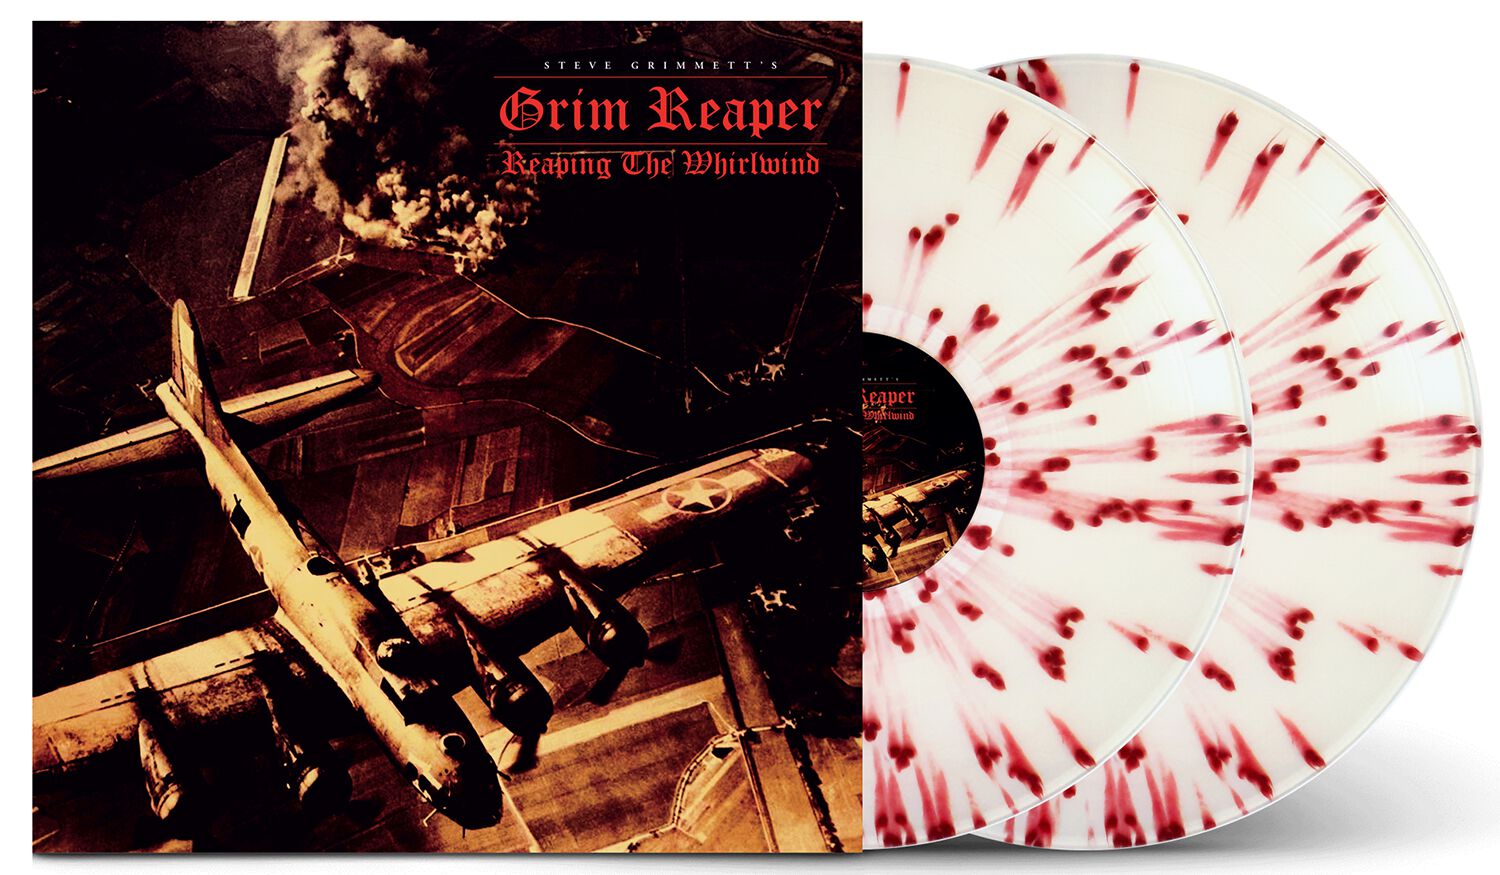 Reaping the whirlwind - Live British Steel Festival 2018 von Grim Reaper - 2-LP (Coloured, Standard)